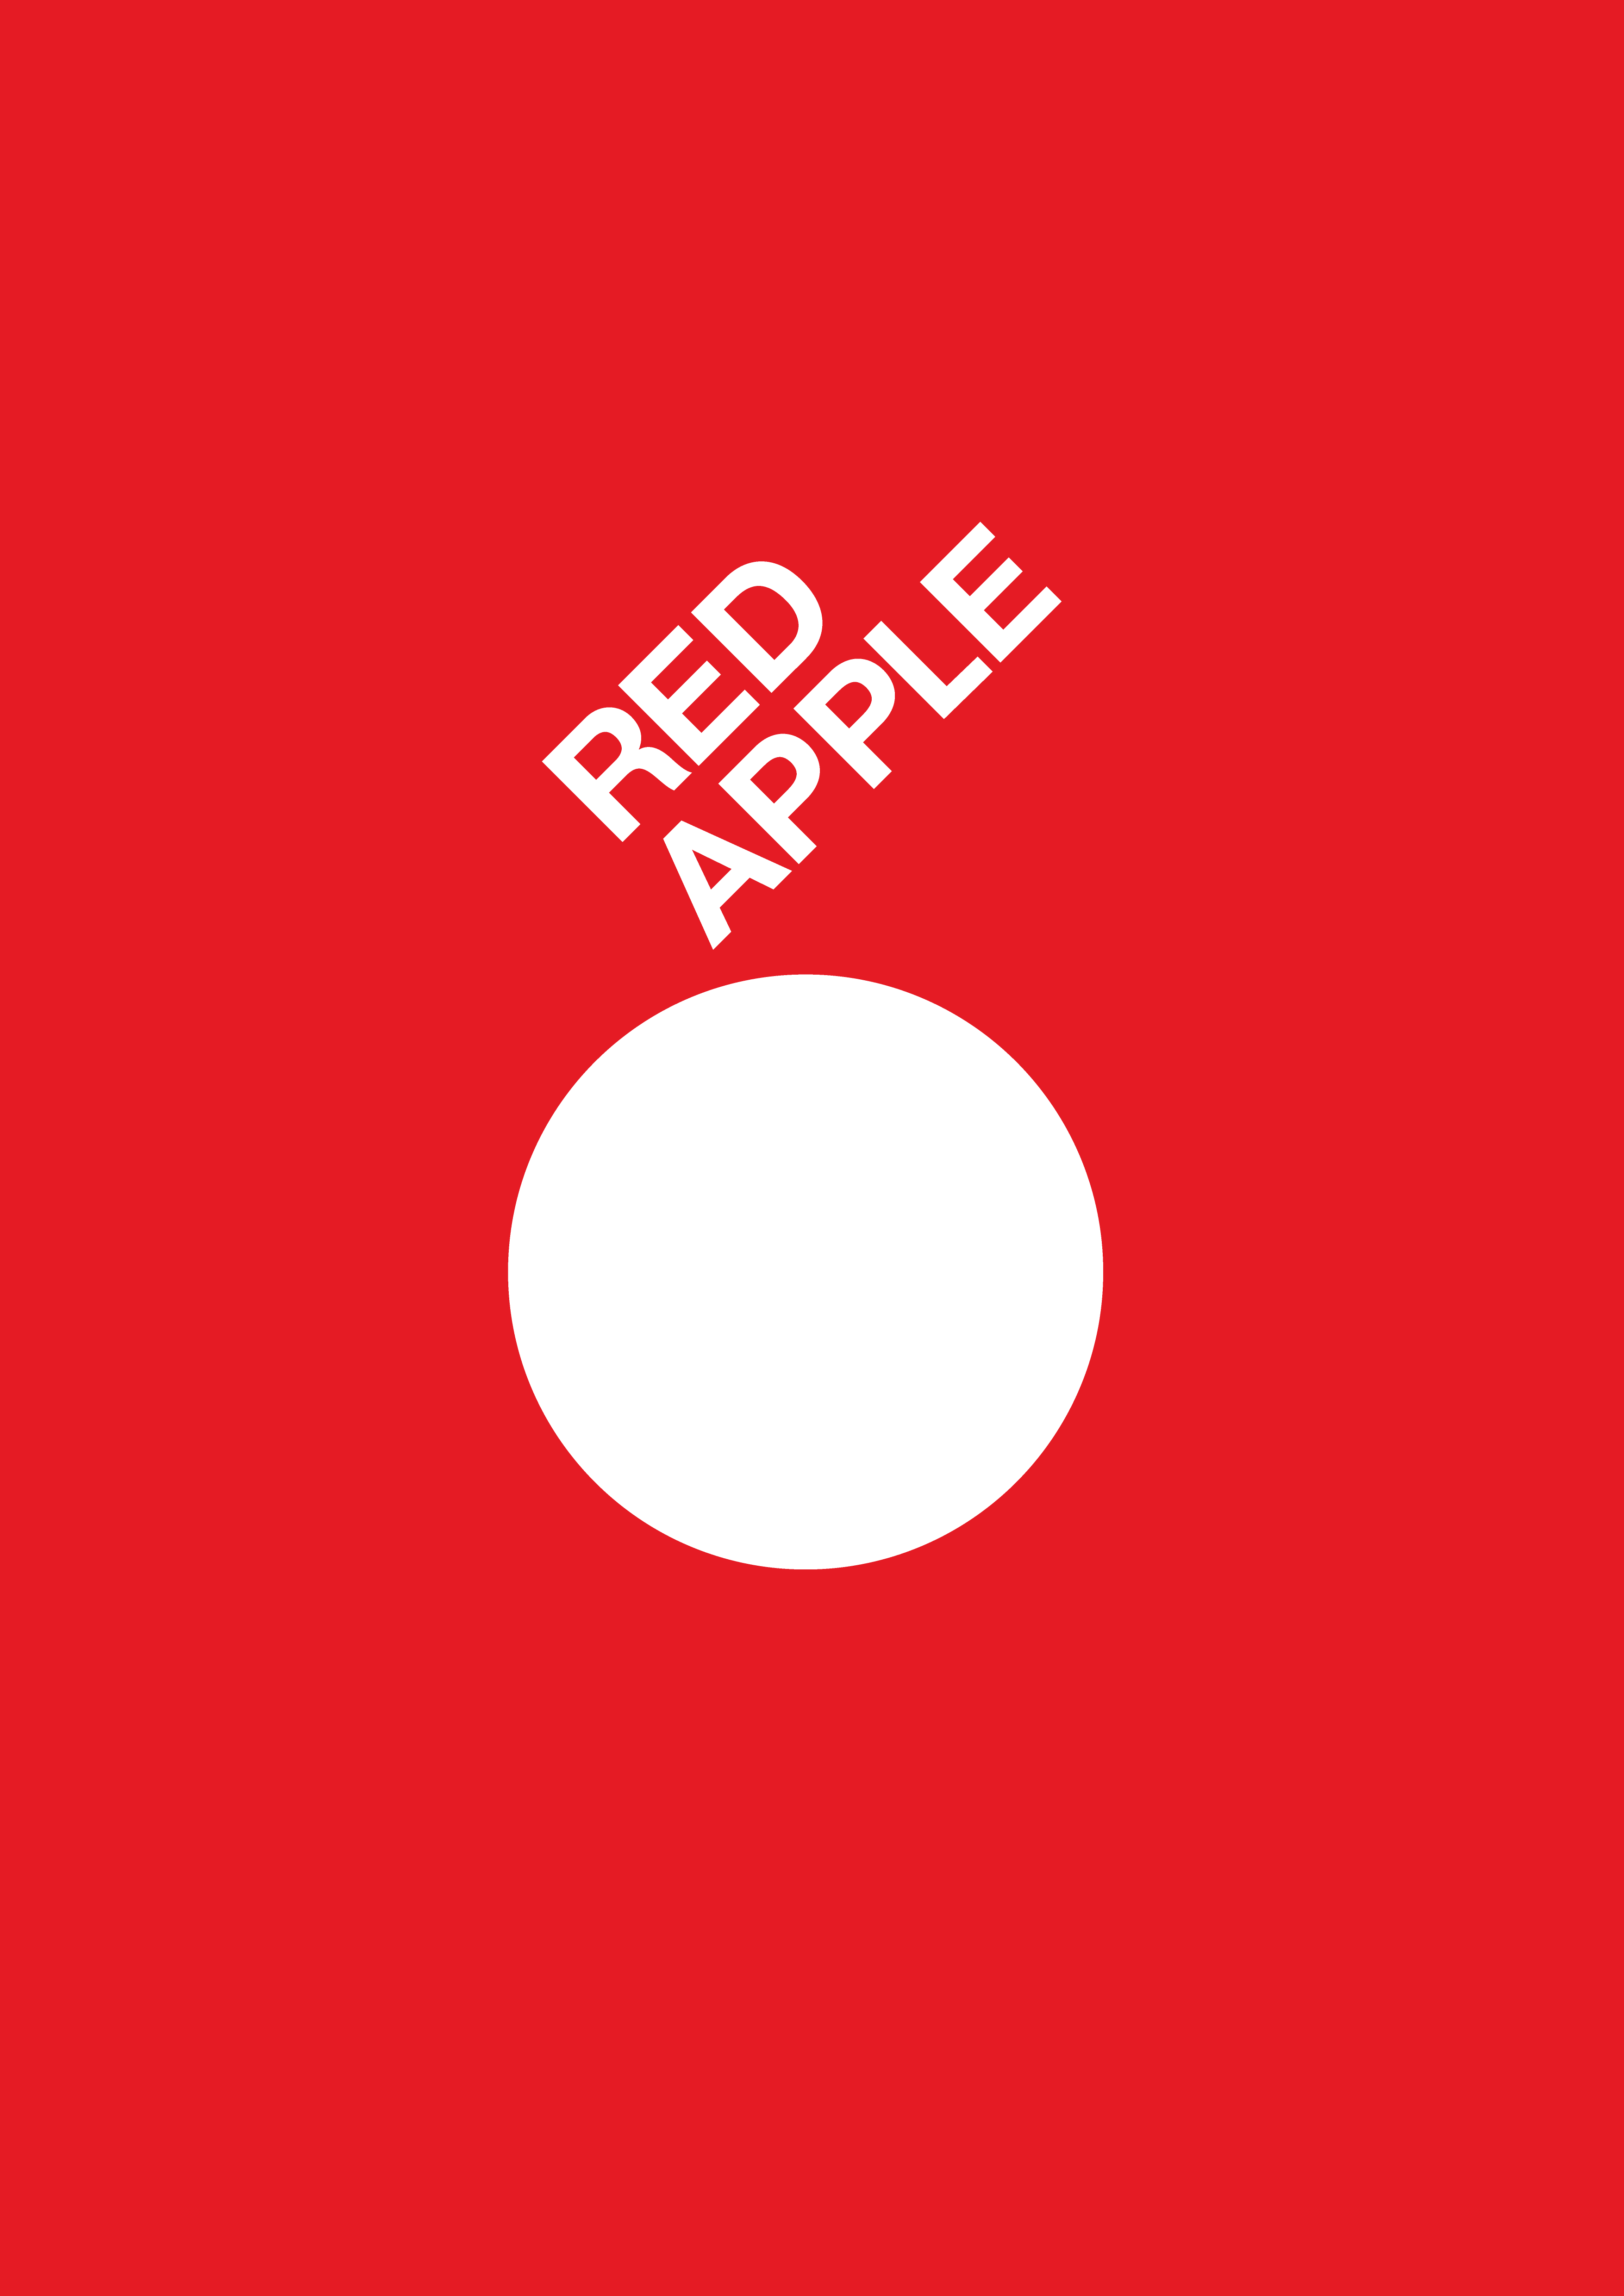    Red Apple 2020  